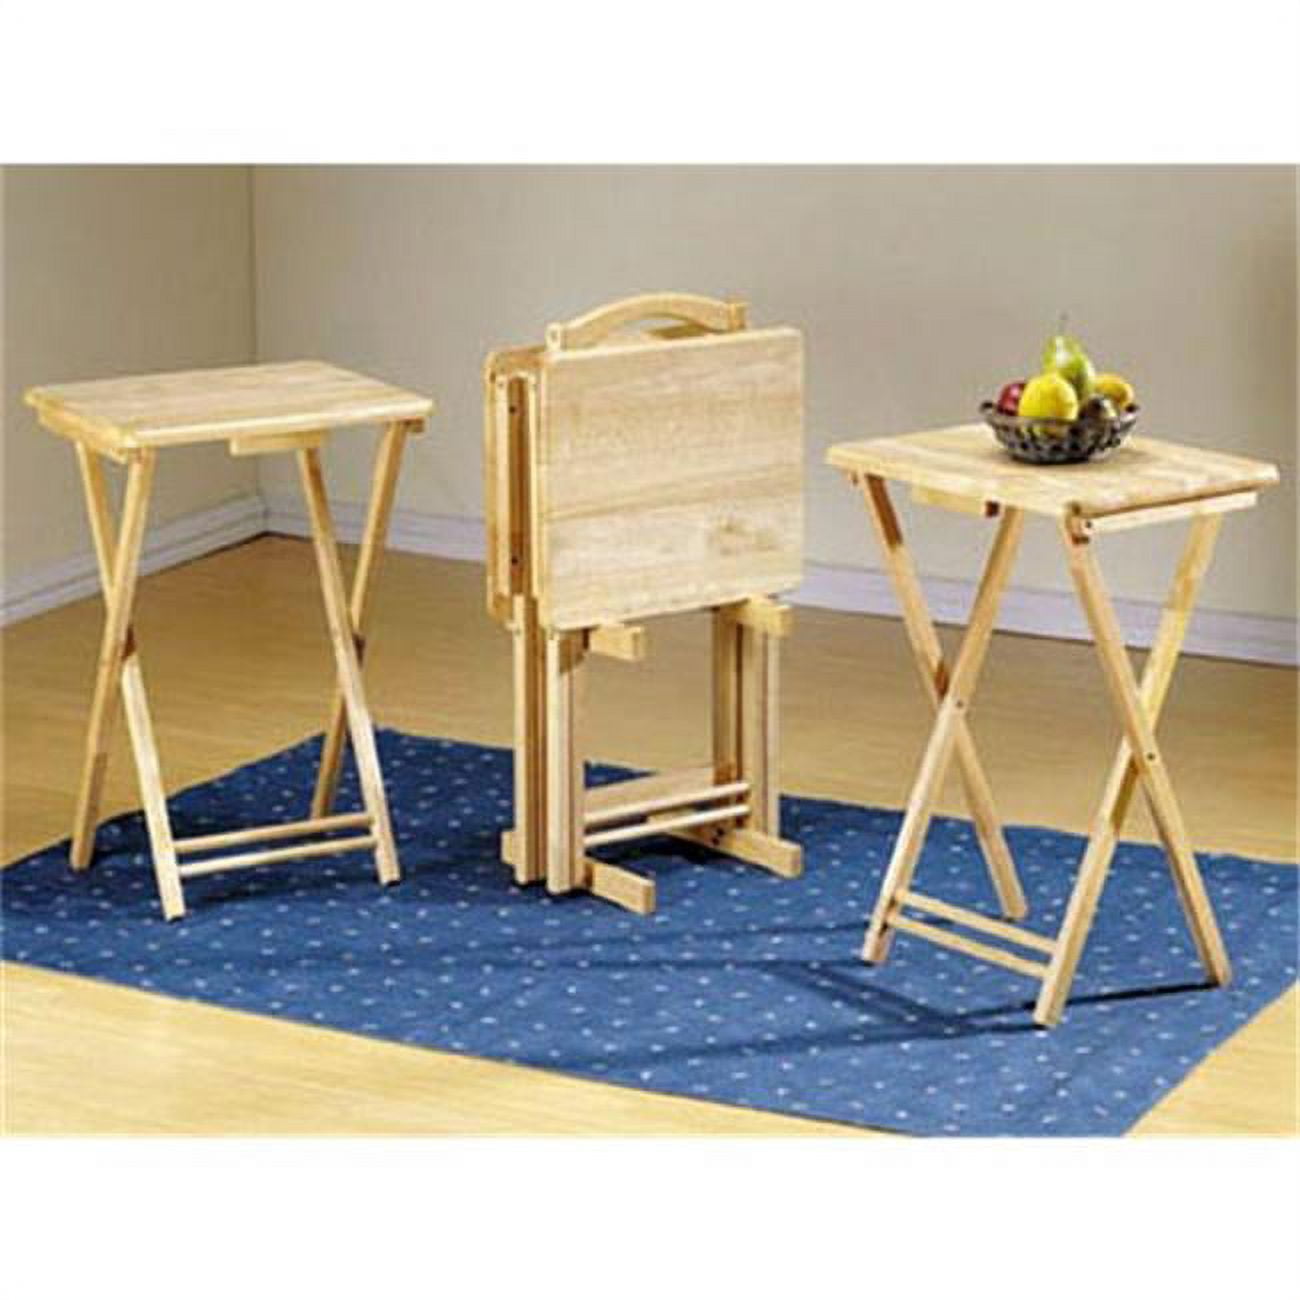 5 Piece TV Tray Table Set in Natural (4 Trays, 1 Stand)